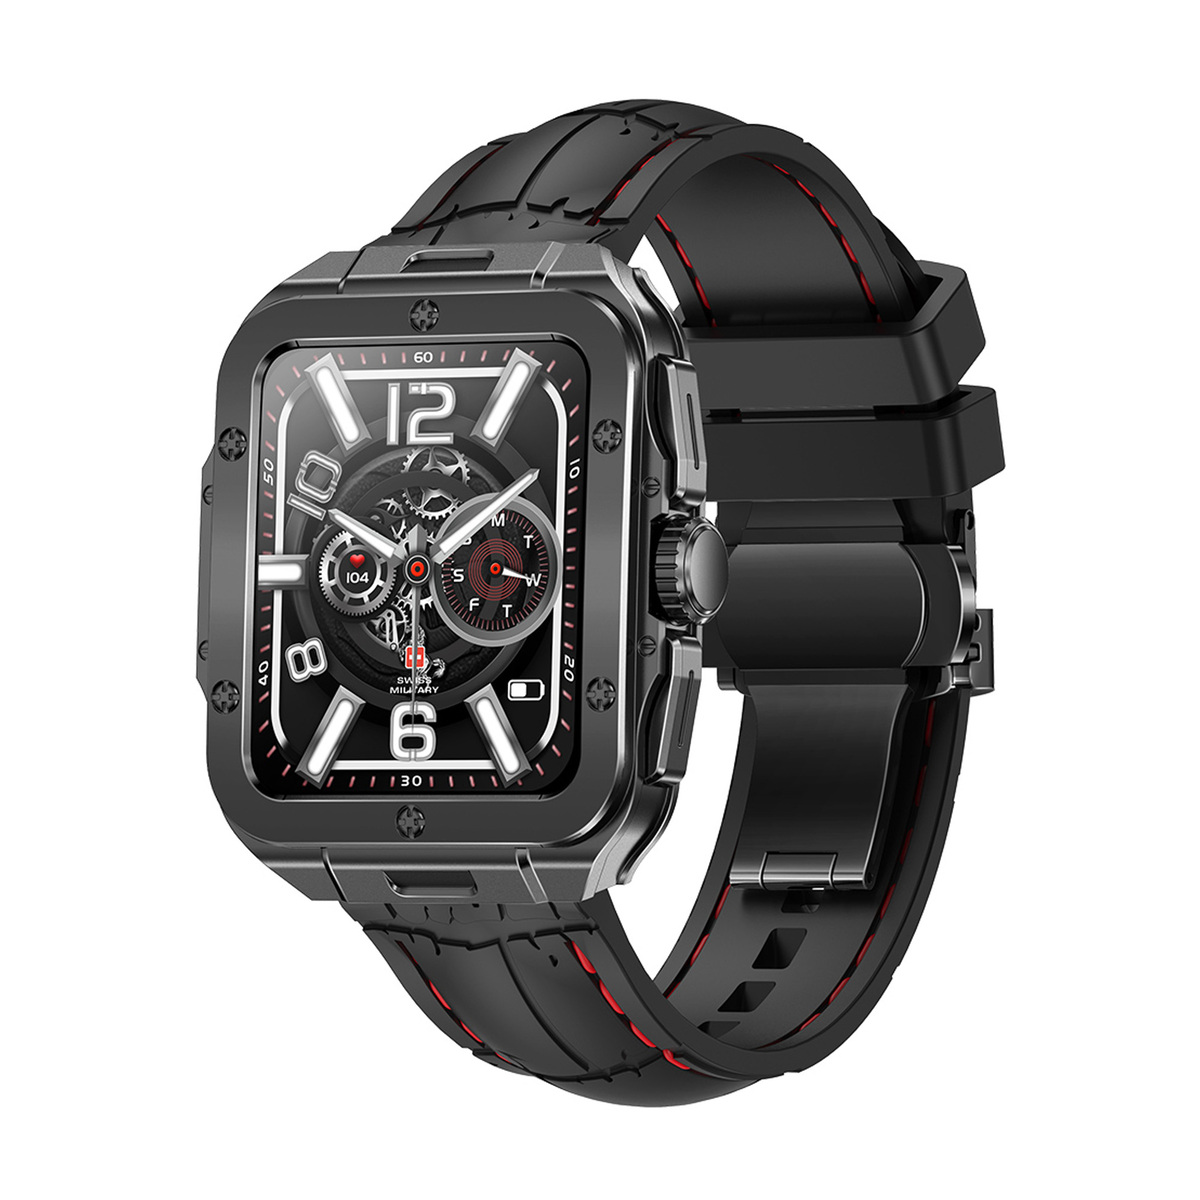 Swiss Military Alps2 Smart Watch, Gun Metal Frame and Black Silicon Strap, 1.85 inch